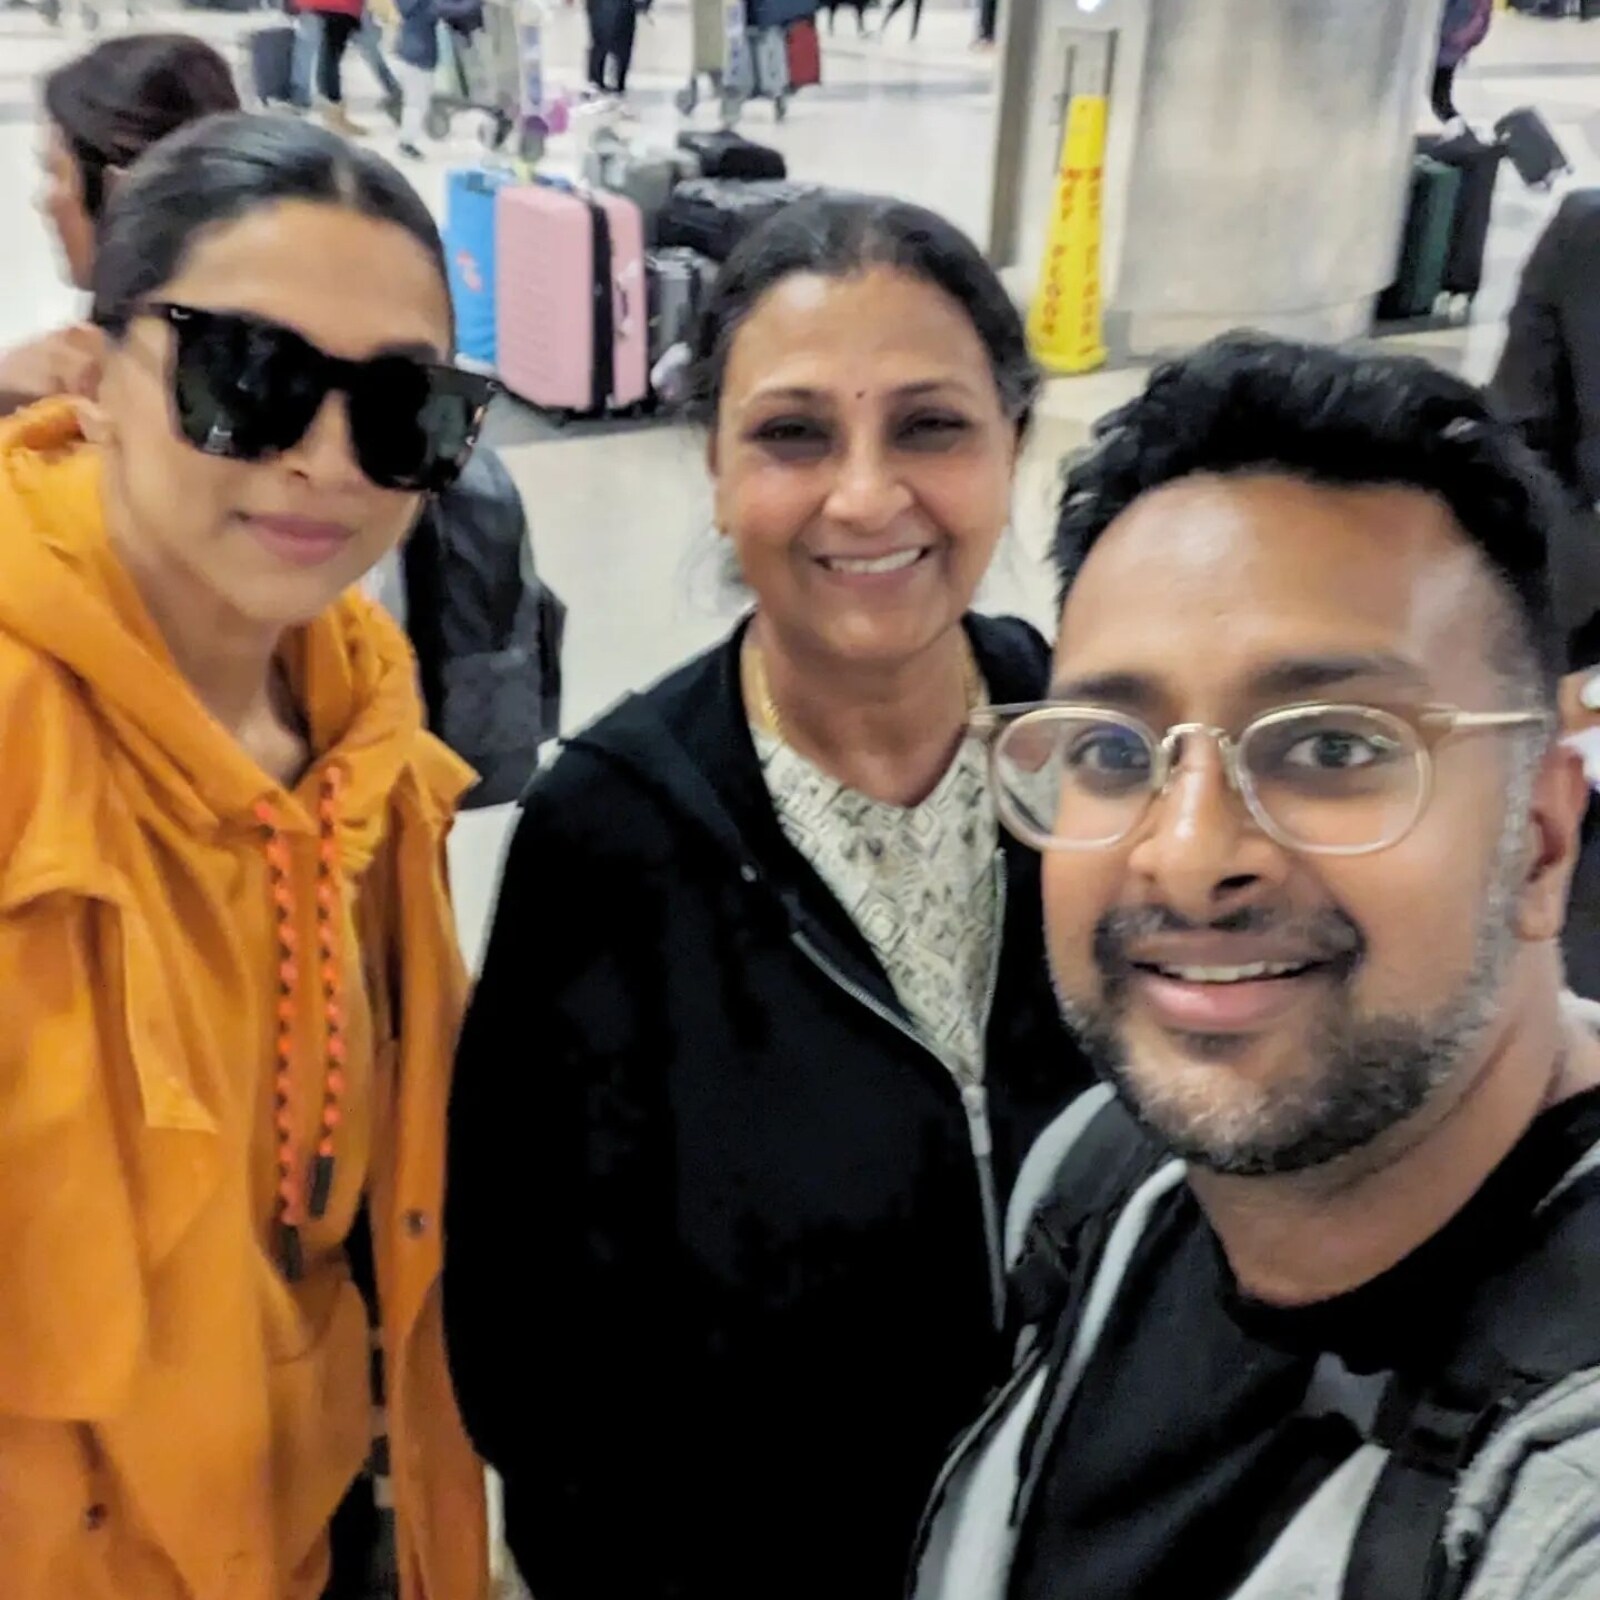 Deepika Padukone Clicked at Paris Fashion Week Show With Parents, Impressed  Fan Says 'Mama Padukone is So Chic' - News18